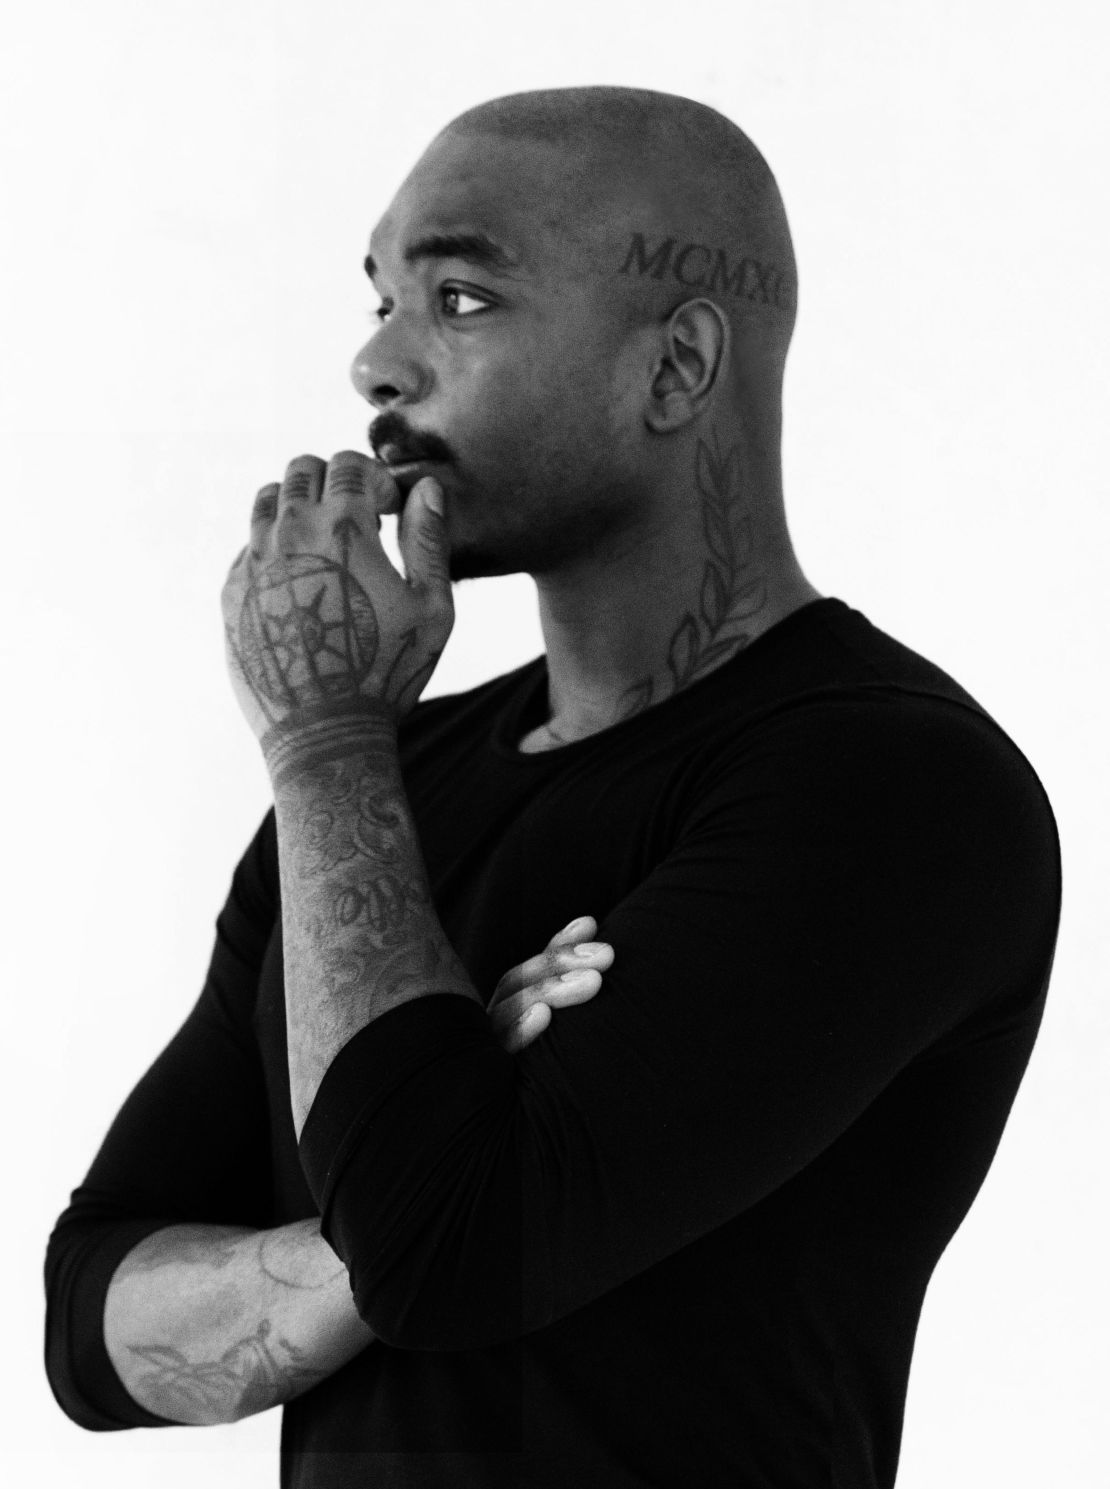 Designer and founder of A Cold Wall* Samuel Ross